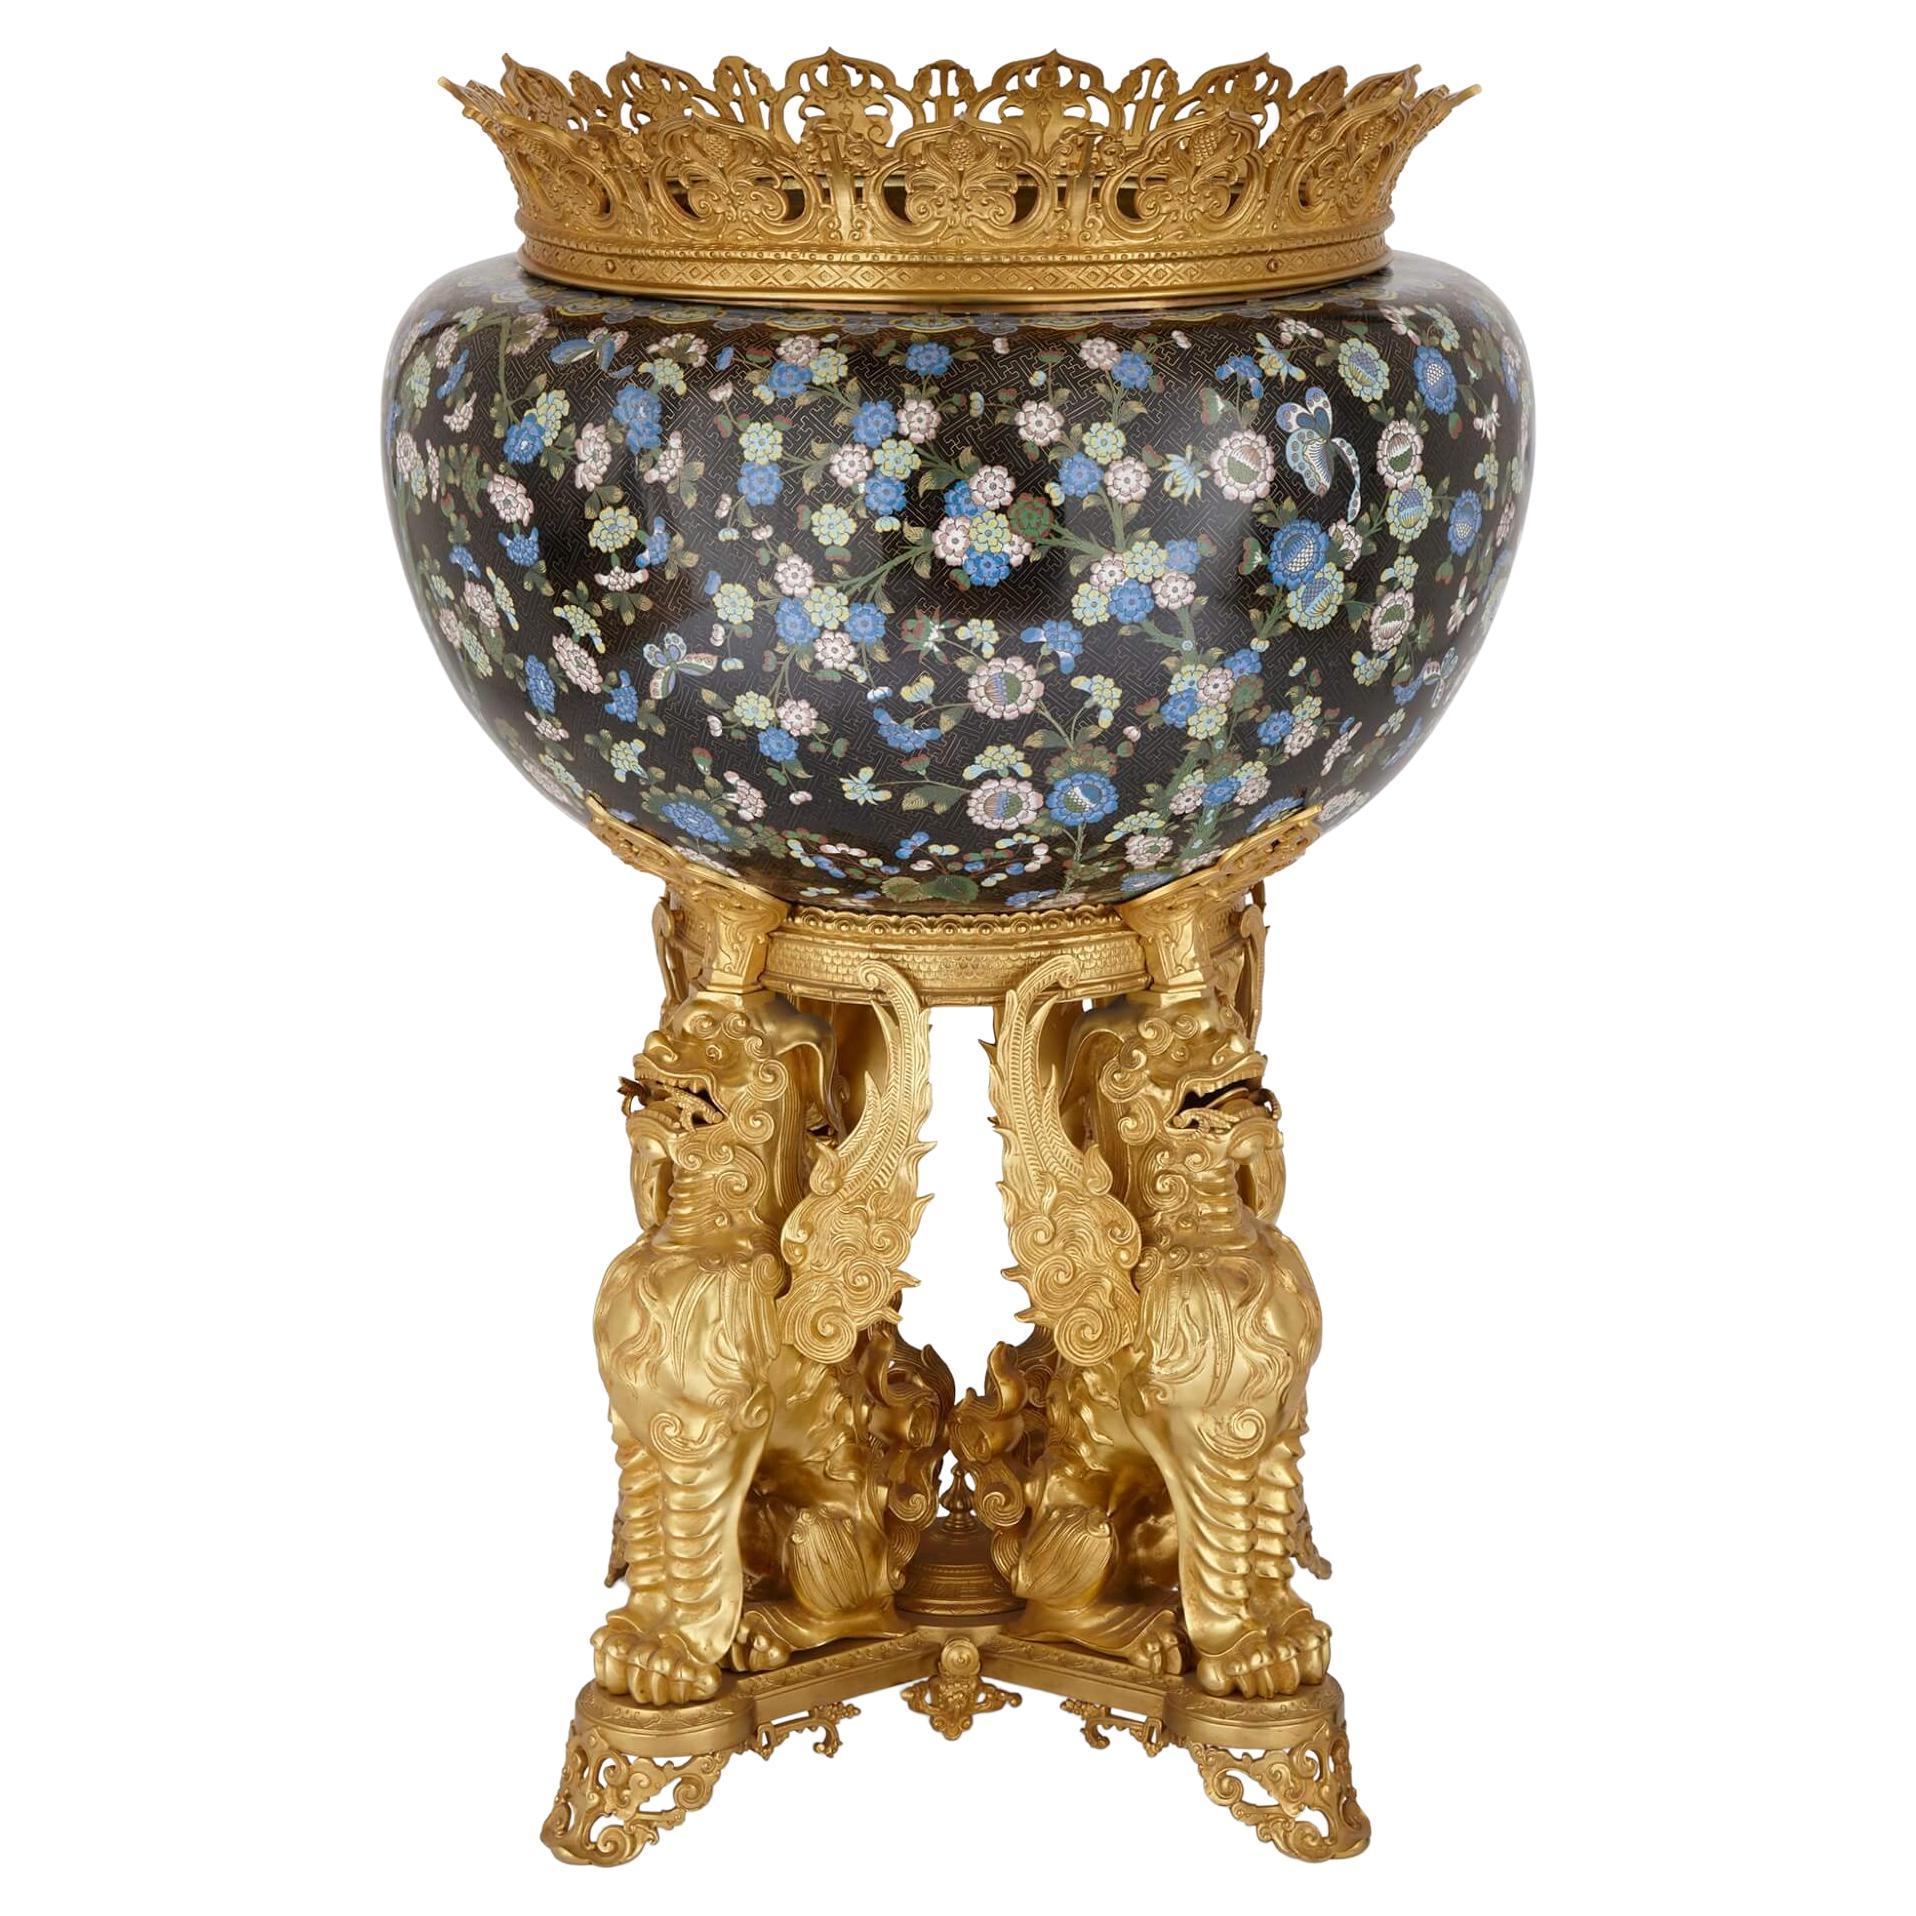 Ormolu and Cloisonné Enamel Jardinière Attributed to F. Barbedienne